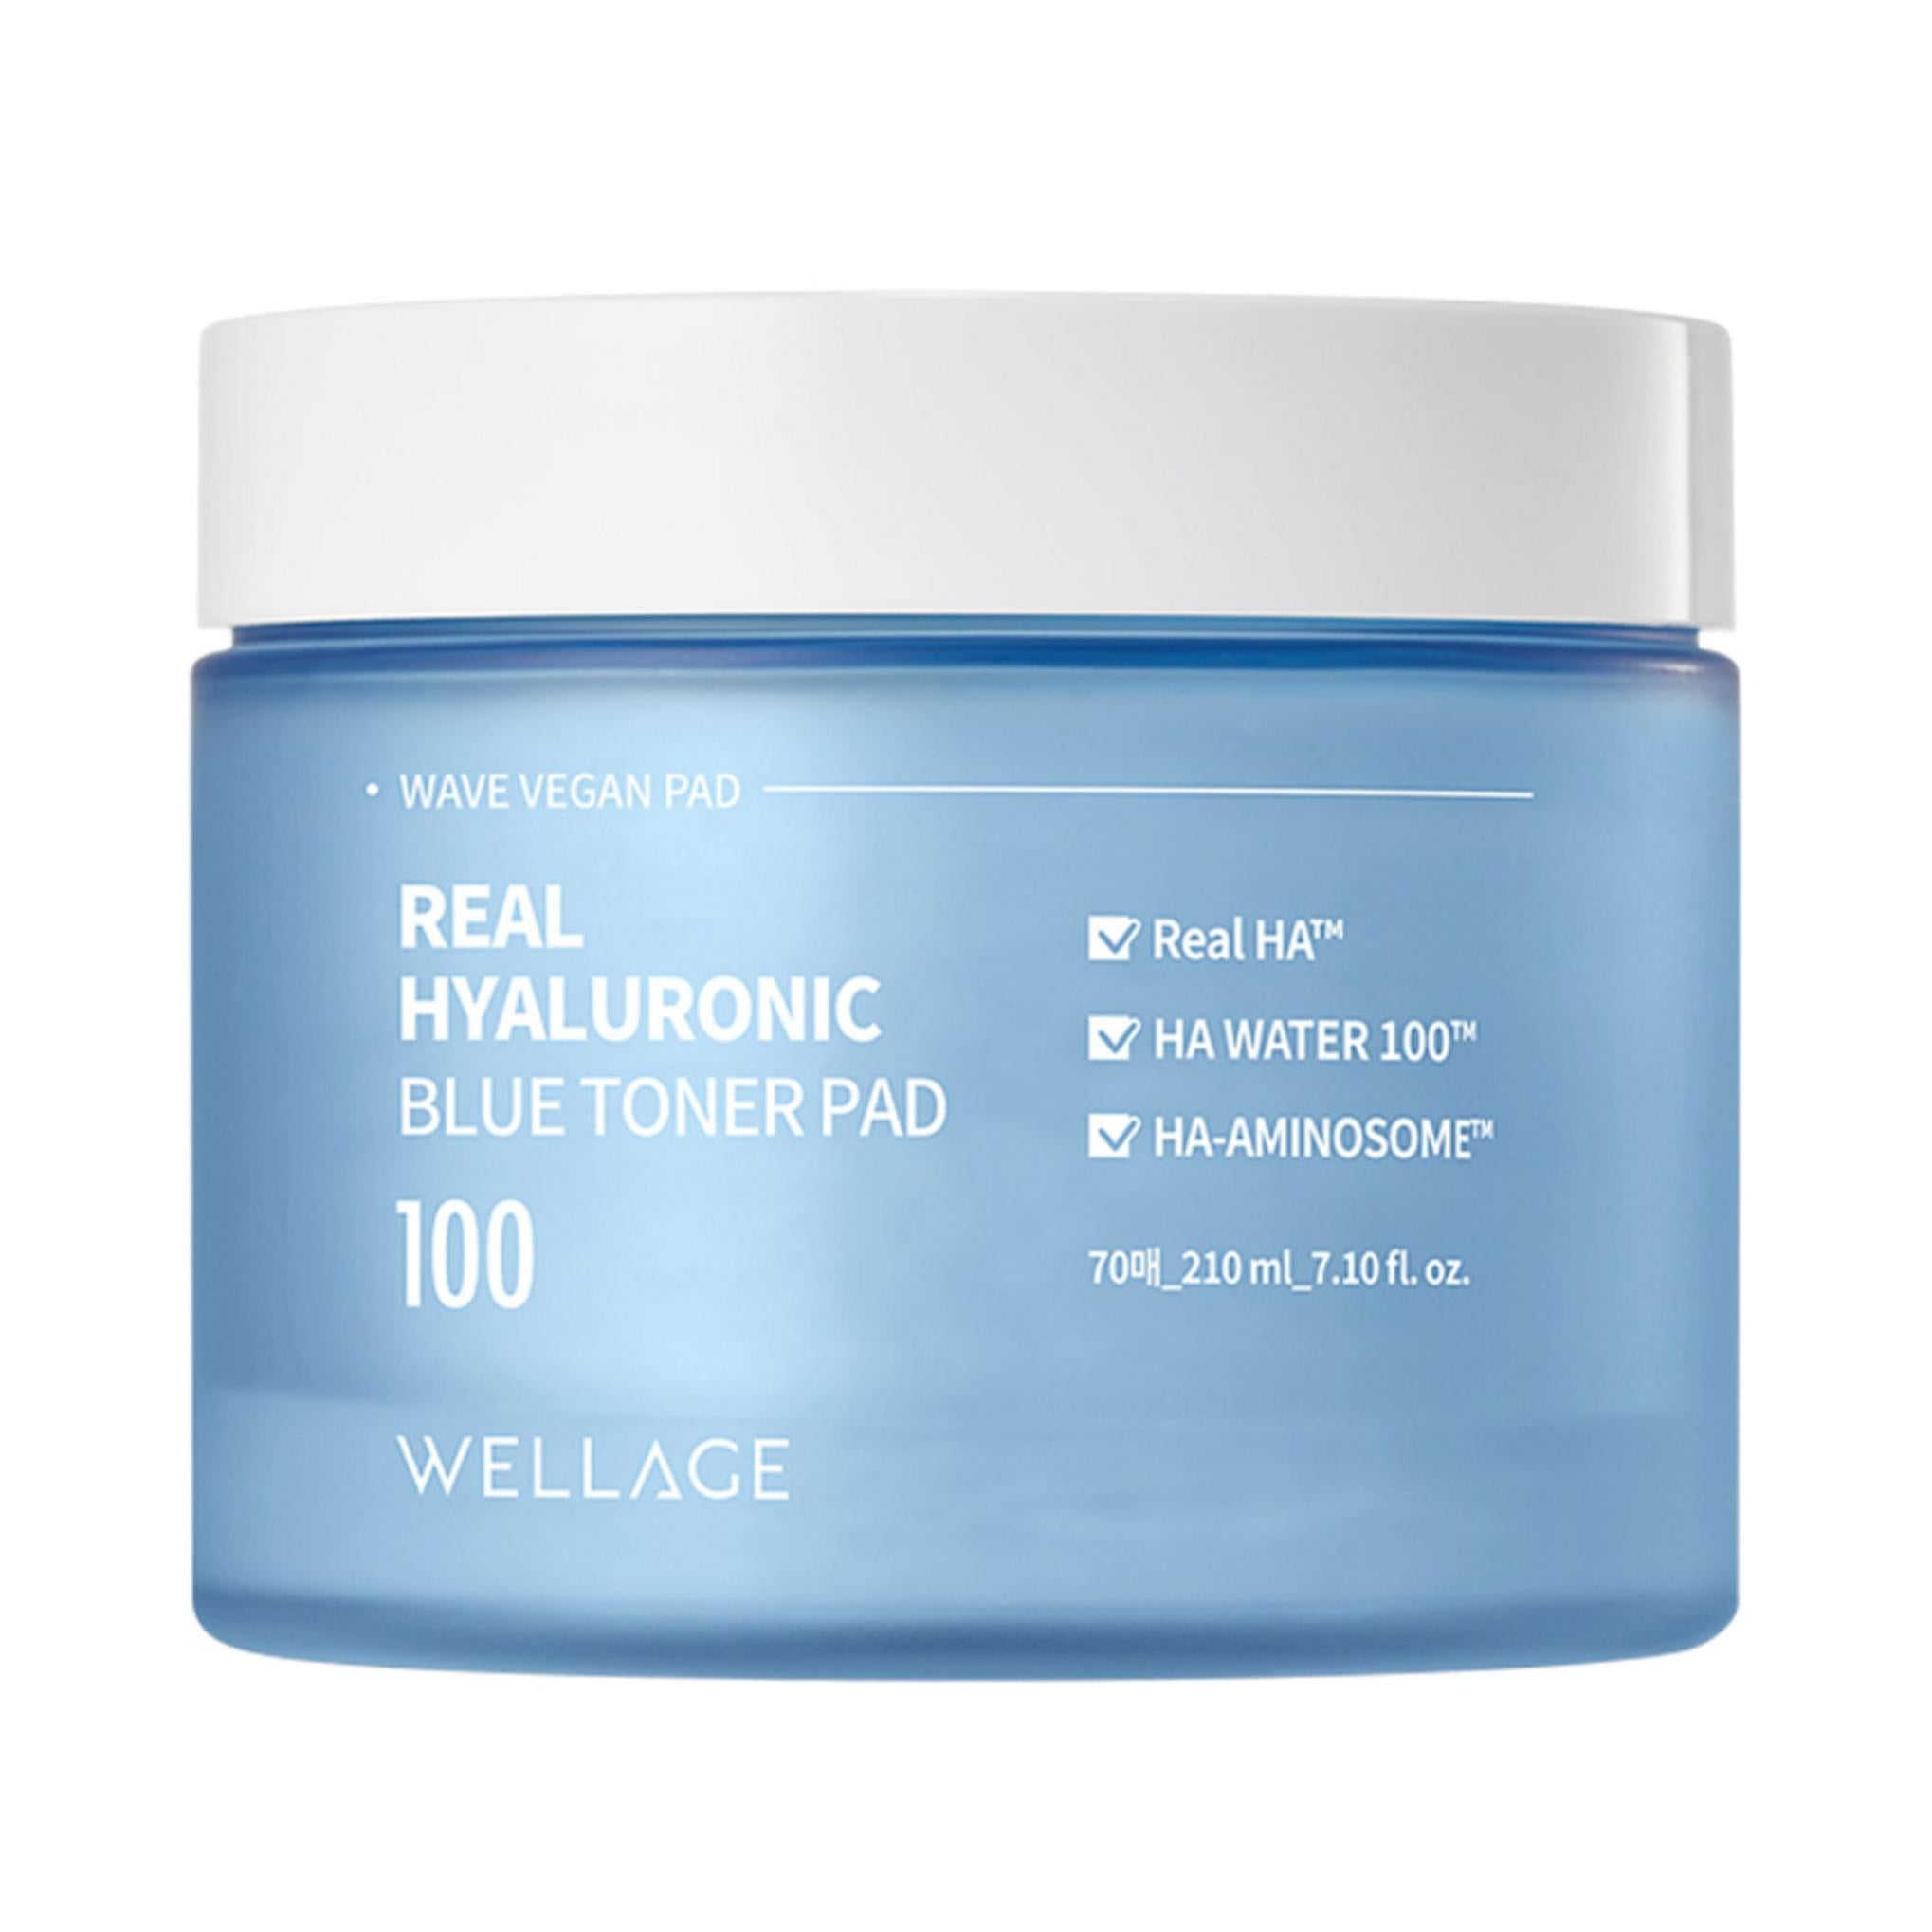 Wellage Real Hyaluronic Blue Toner Pad 210ml